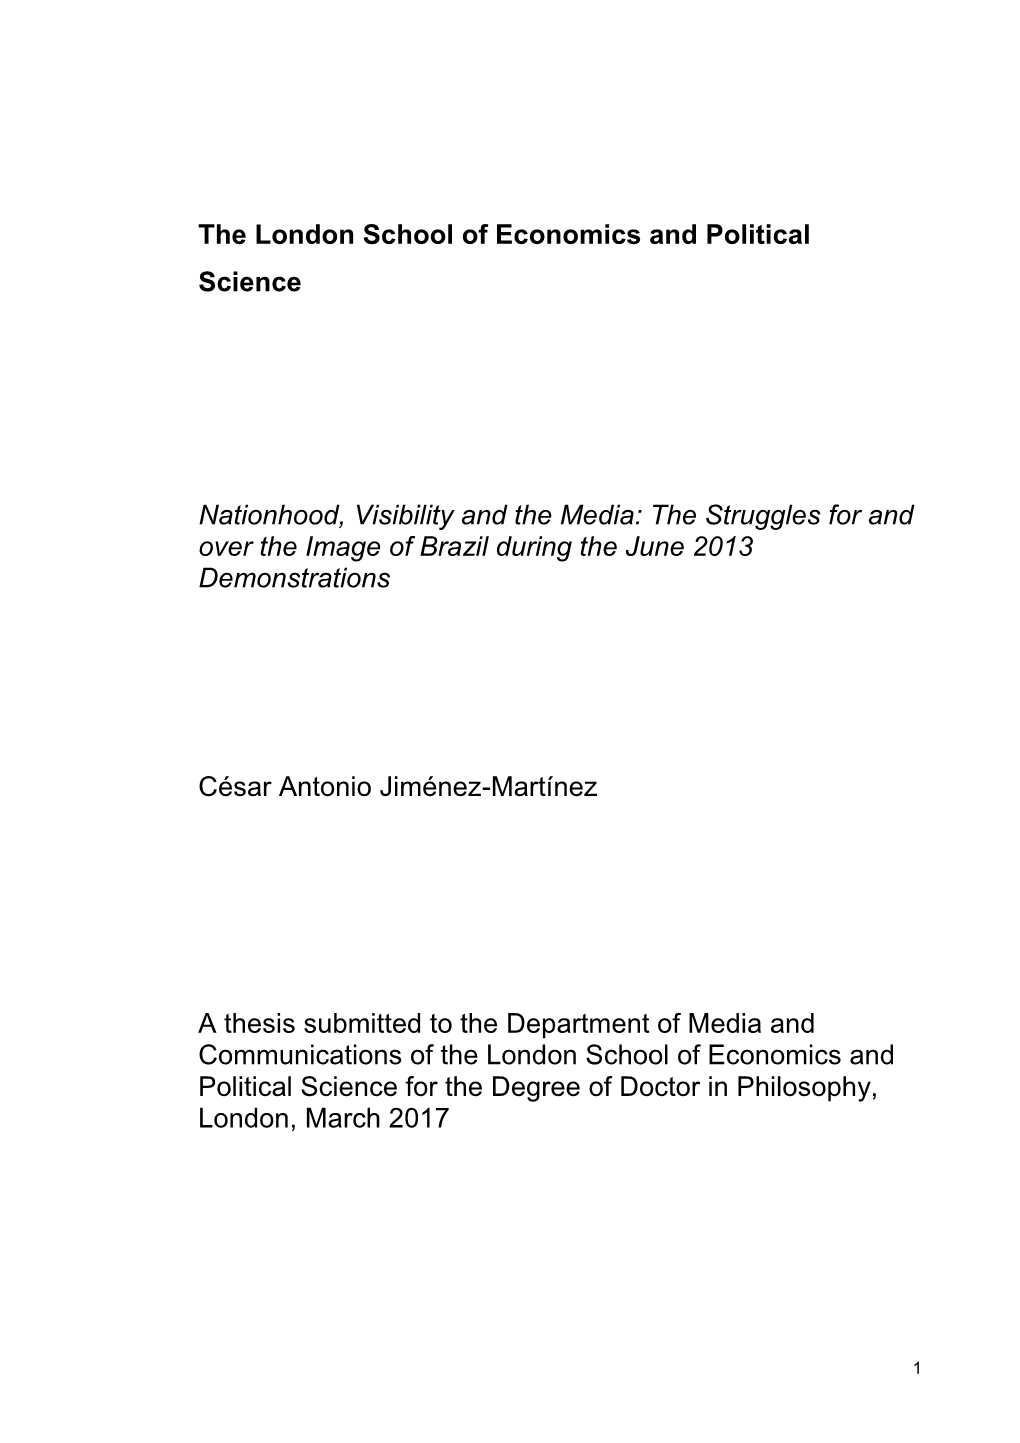 The London School of Economics and Political Science Nationhood